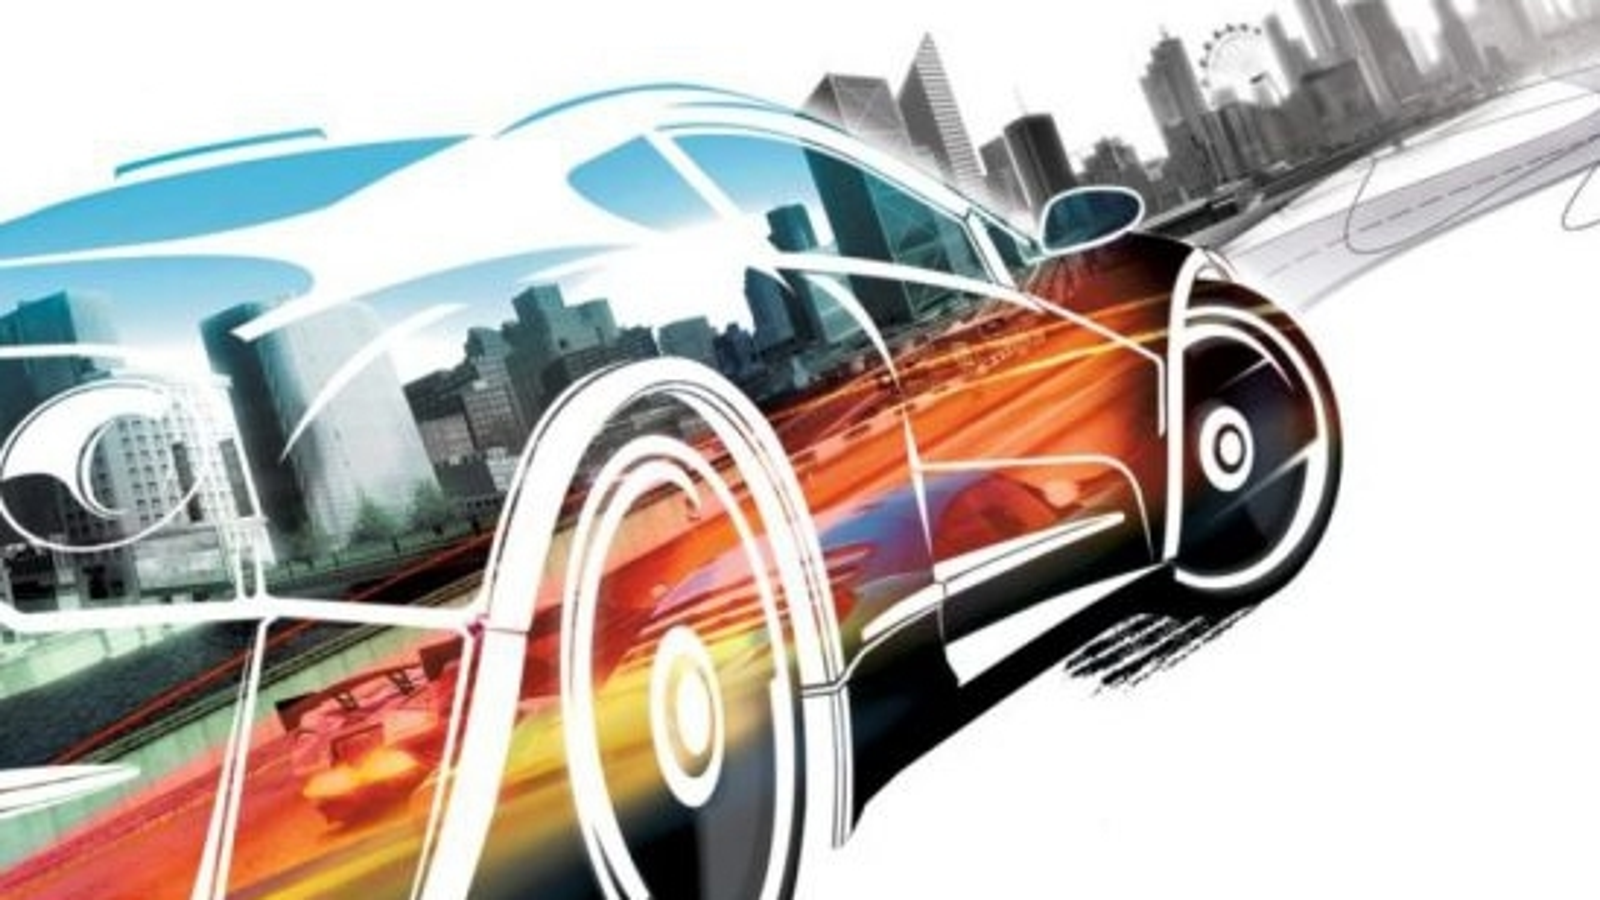 Burnout Paradise Remastered review